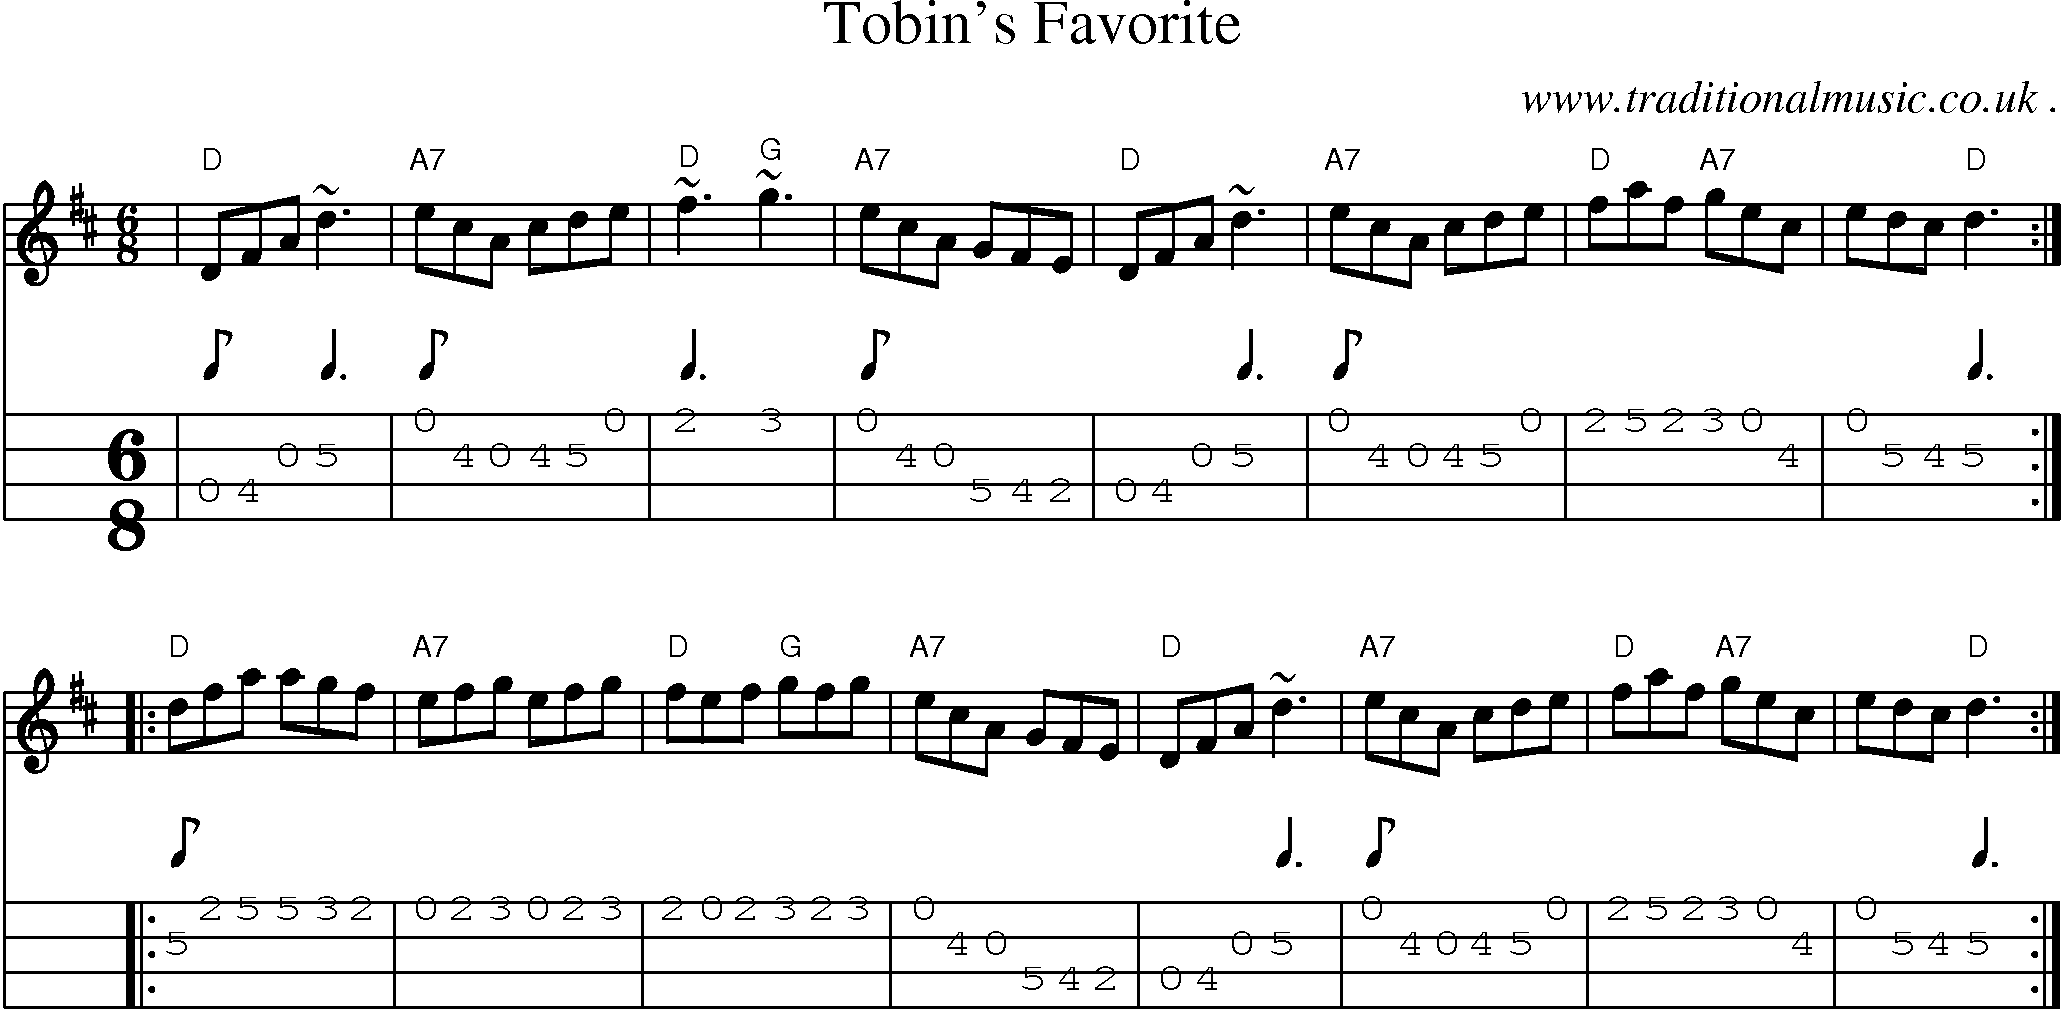 Sheet-music  score, Chords and Mandolin Tabs for Tobins Favorite